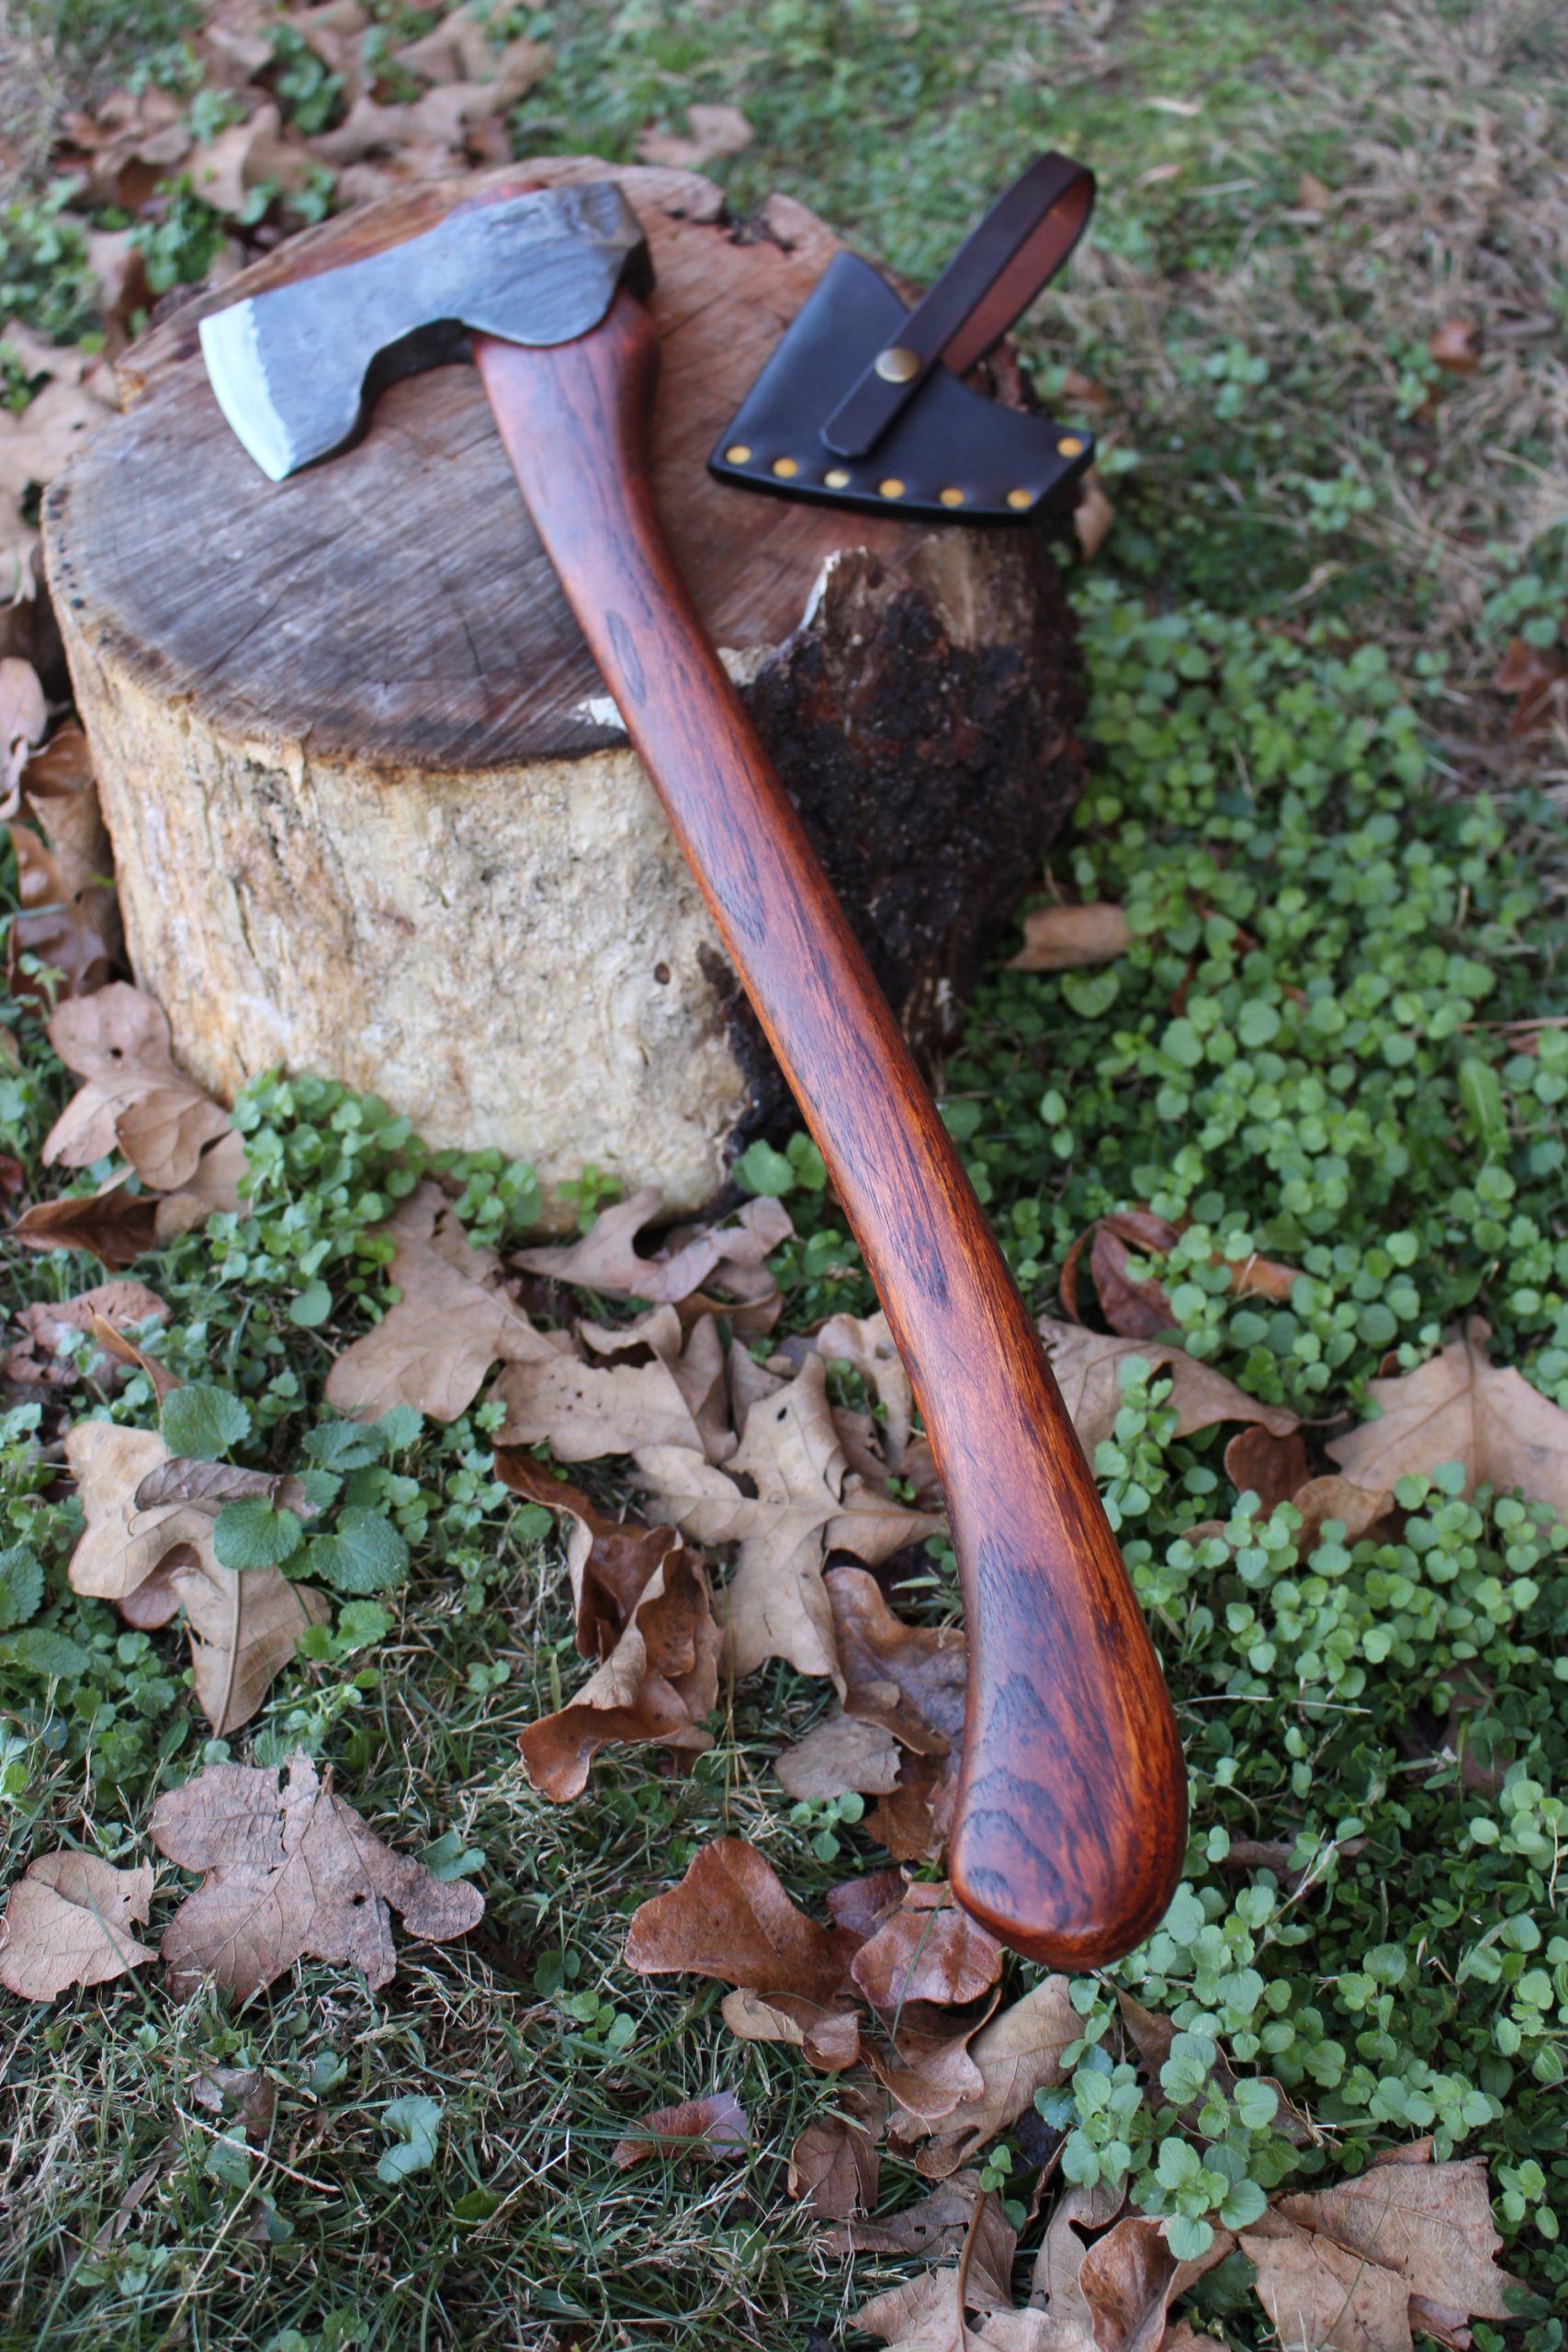 handmade, usa made, usa made axe, hatchet, chopping, wood chopping, outdoor, outdoorsman, survival, backwoodsman, hickory, axe made in america, axes made in the usa, ike bullington, wolf valley forge, valley forge, pack axe, back packing, camping, trail axe, hunting axe, trappers axe, camp axe, bush axe, belt axe, pack axe, leather shoulder rig, chopping axe, leather axe carrier, shoulder sling for axe, carpenter's axe, Wolf Valley Forge, Wolf Valley Forge axe release, Axe Wax, haversack, go back, man purse, man bag, canvas bag, reenactor, reenacting, Trekker Axe, Axe Life